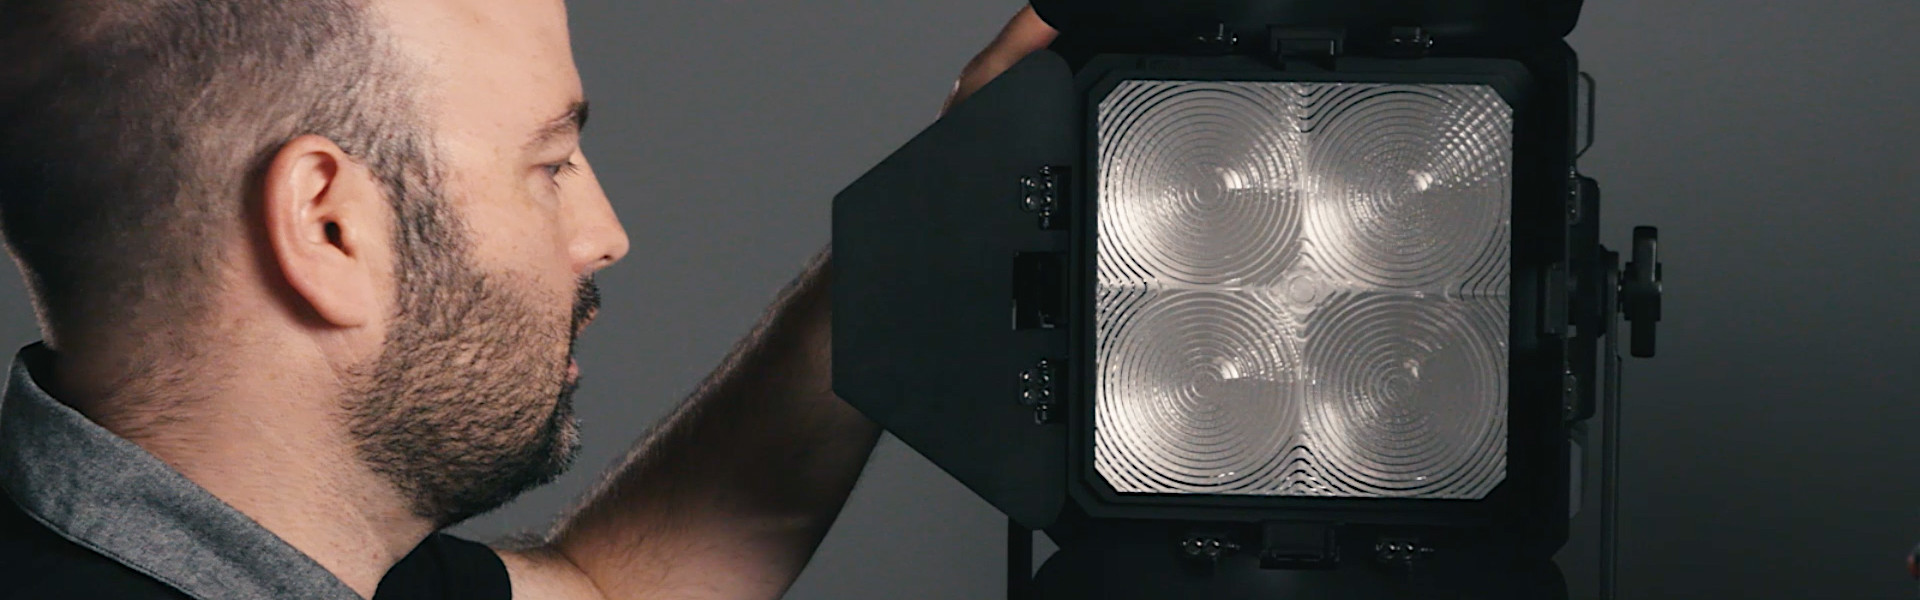 Header image for article At the Bench with Jem Schofield: Fiilex Matrix LED Panel Light